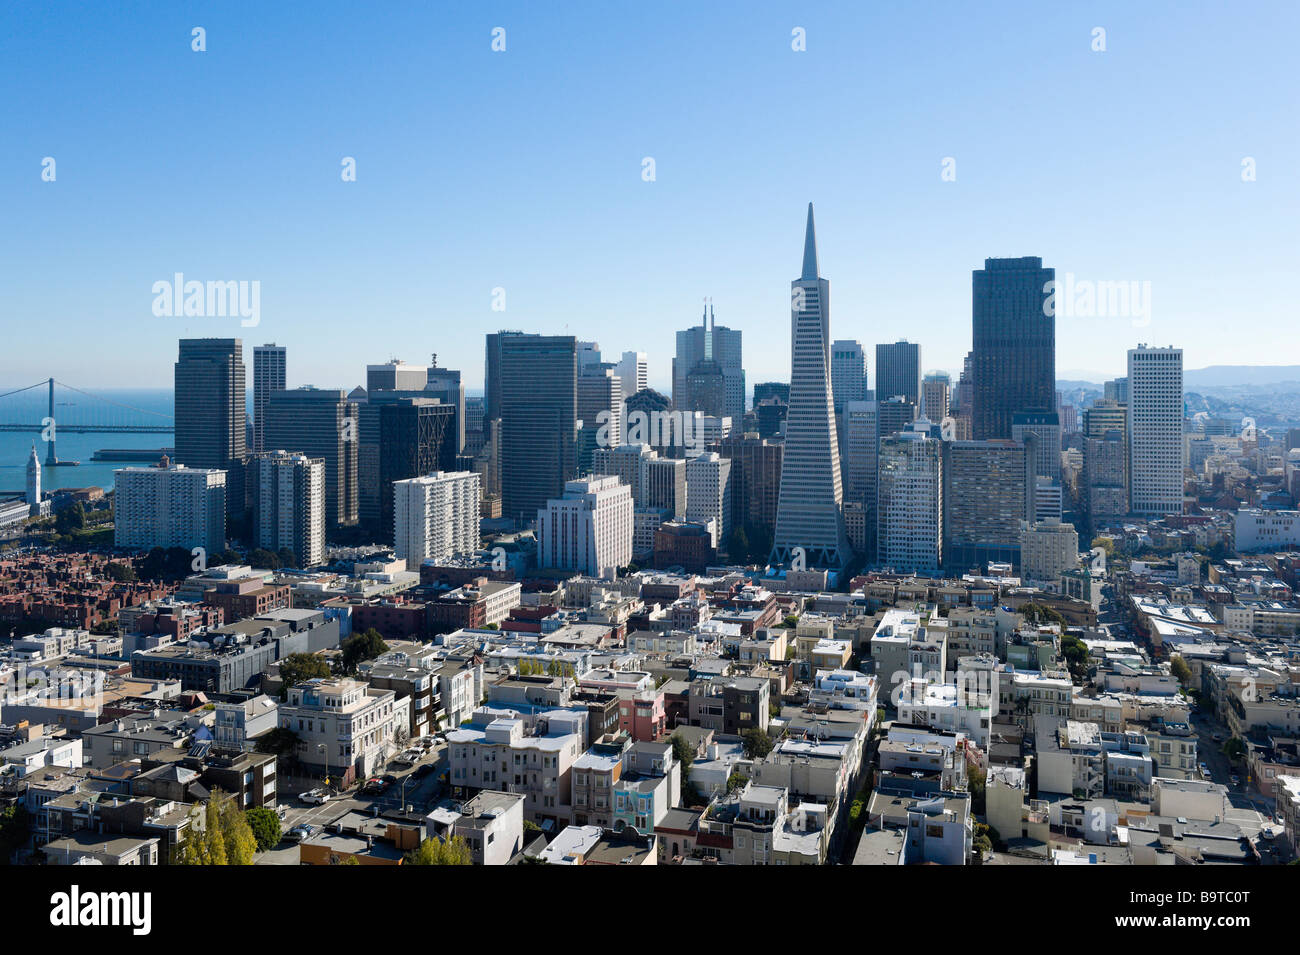 The downtown financial district from the top of the Coit Tower onTelegraph Hill, San Francisco, California, USA Stock Photo